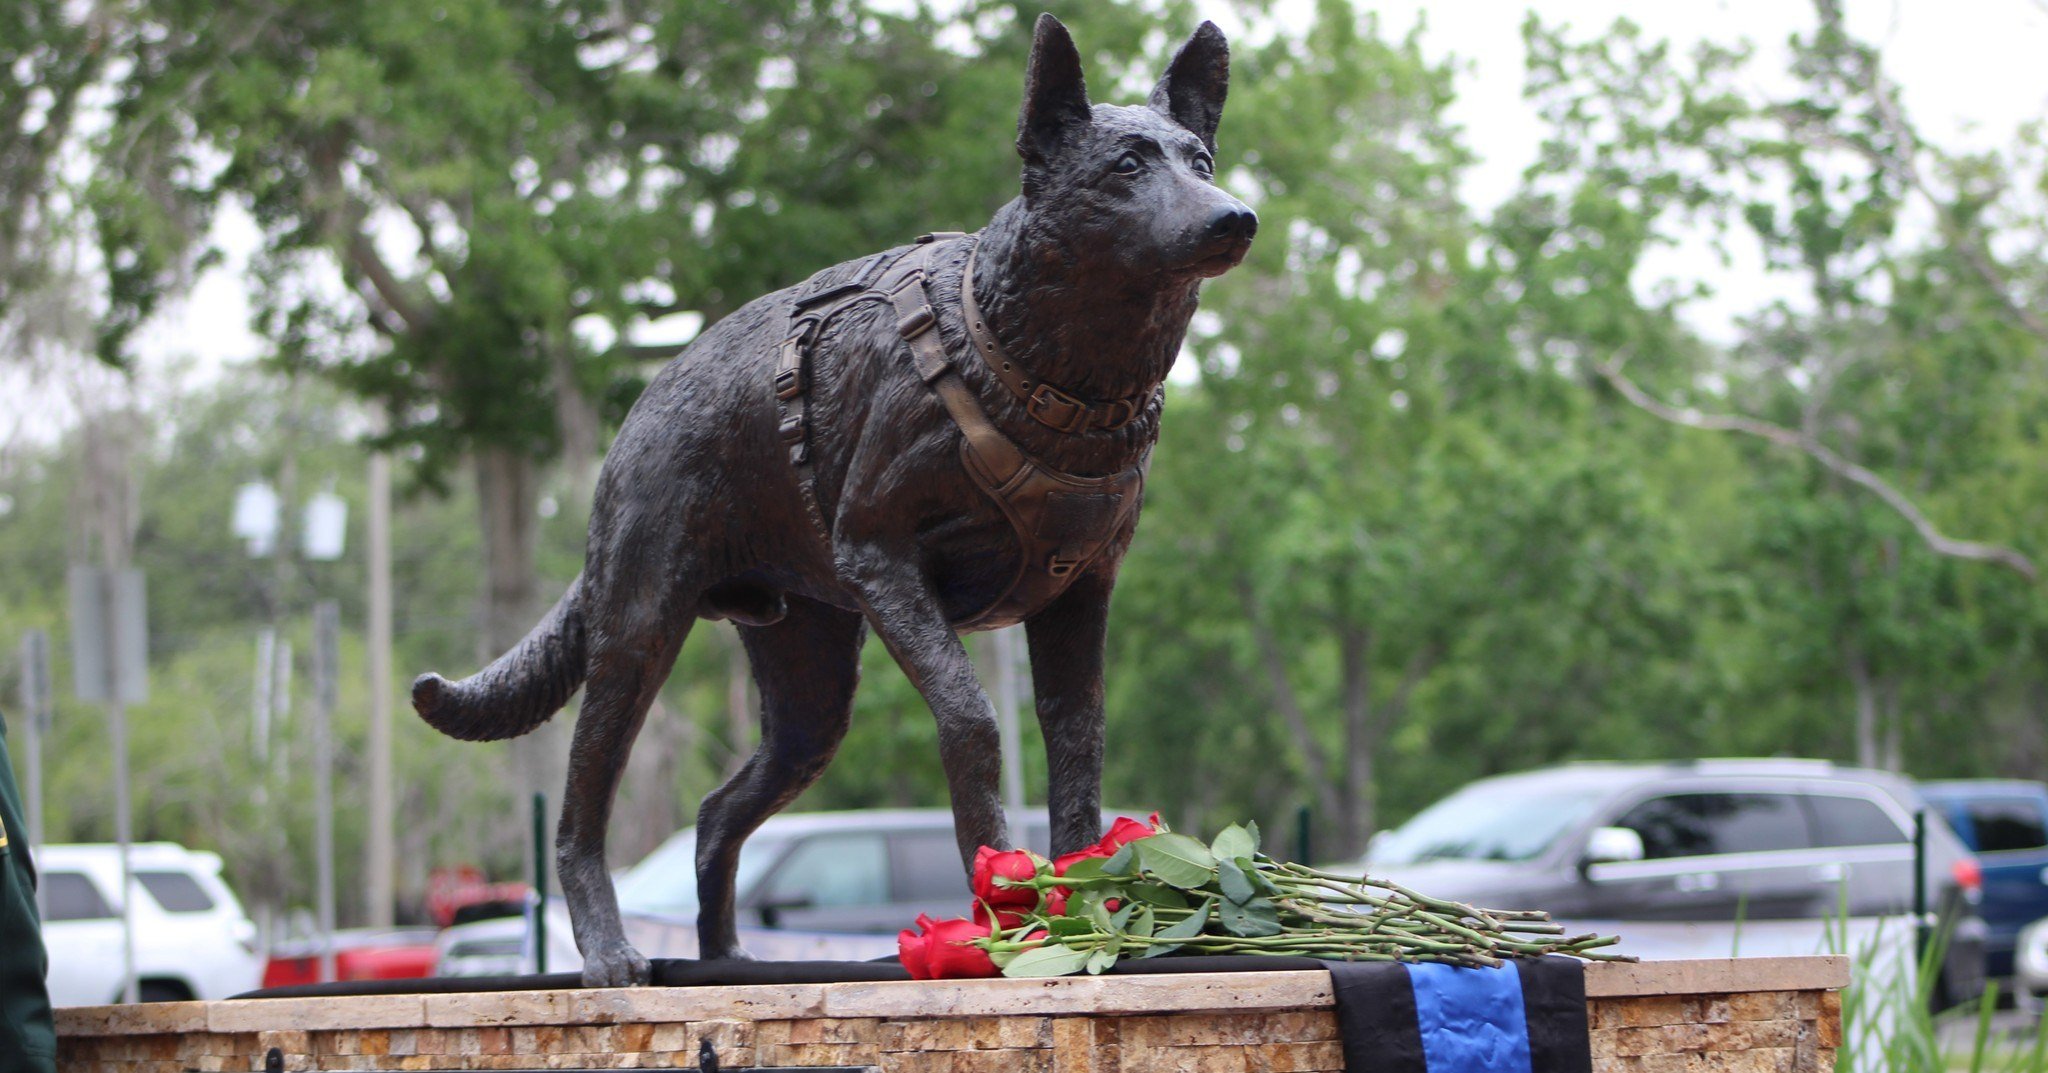 National Police Week also honors K9 officers who, alongside their handlers, dedicated many years to keeping their communities safe. This morning, 31 K9s were honored at the Nam Knights Regional K-9 Memorial at the Temple Terrace Police Department. Of